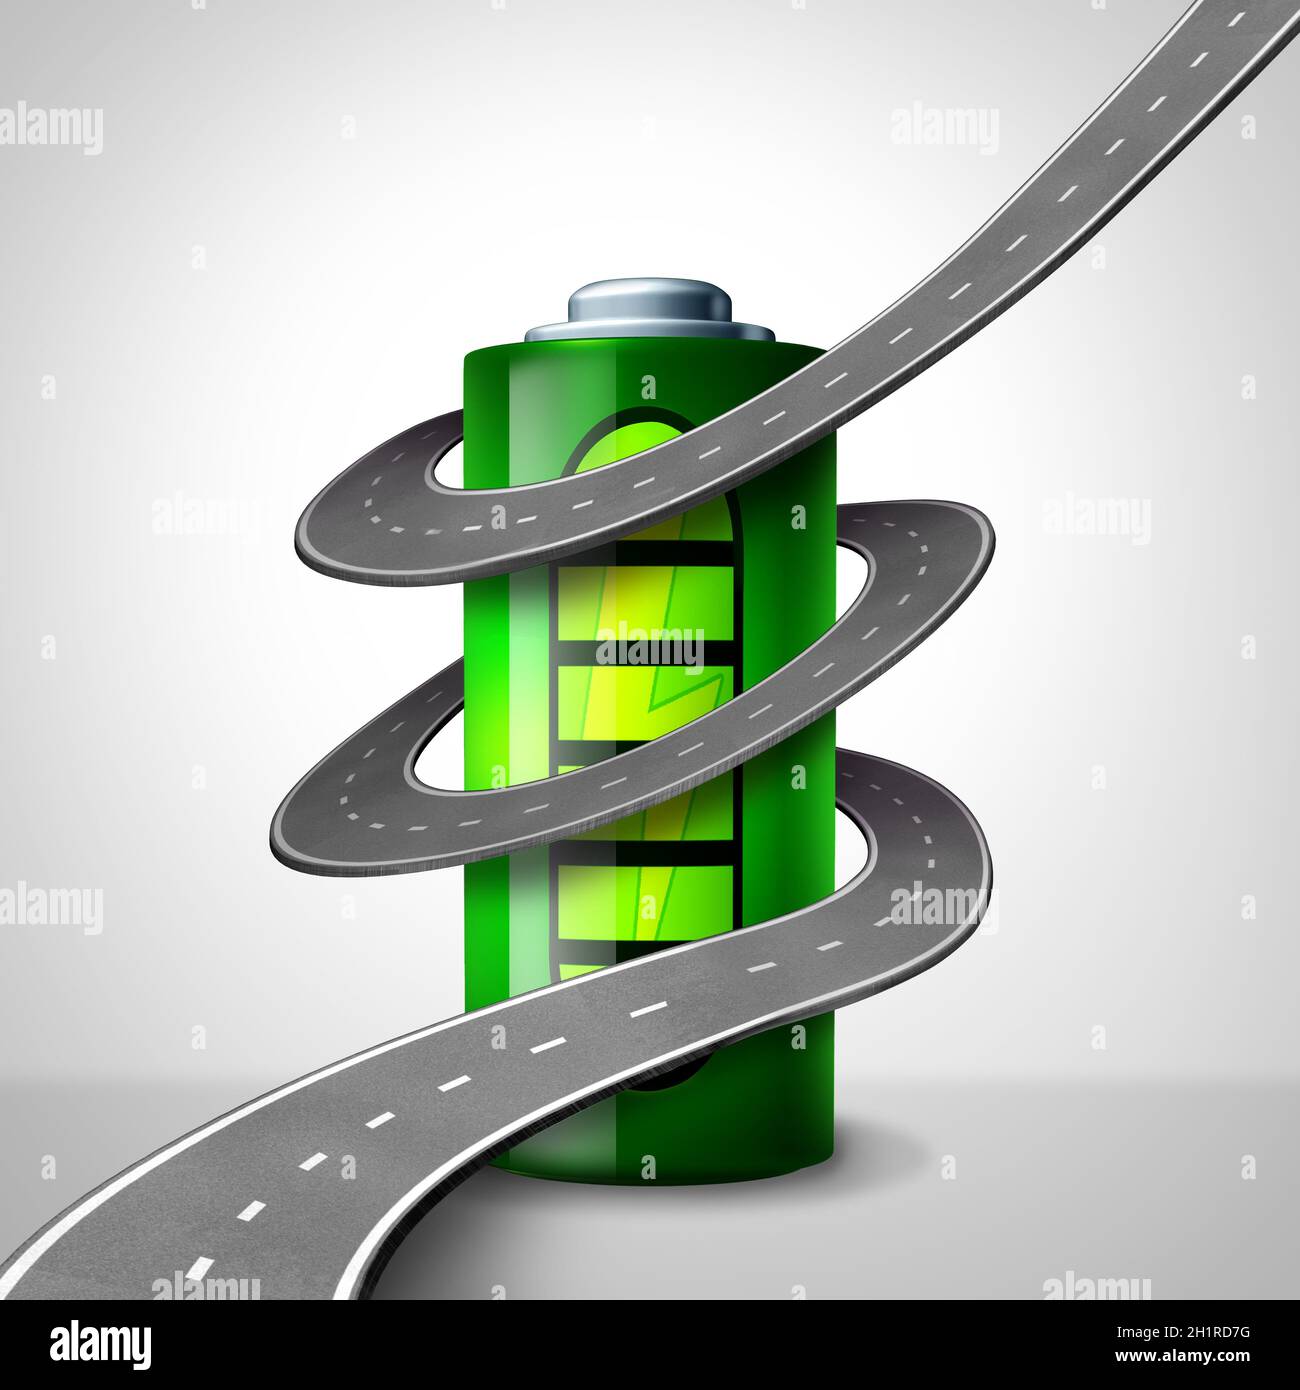 EV Road Revolution or electric vehicle battery technology or charging station concept  as a symbol for road or highway electrification of transport. Stock Photo